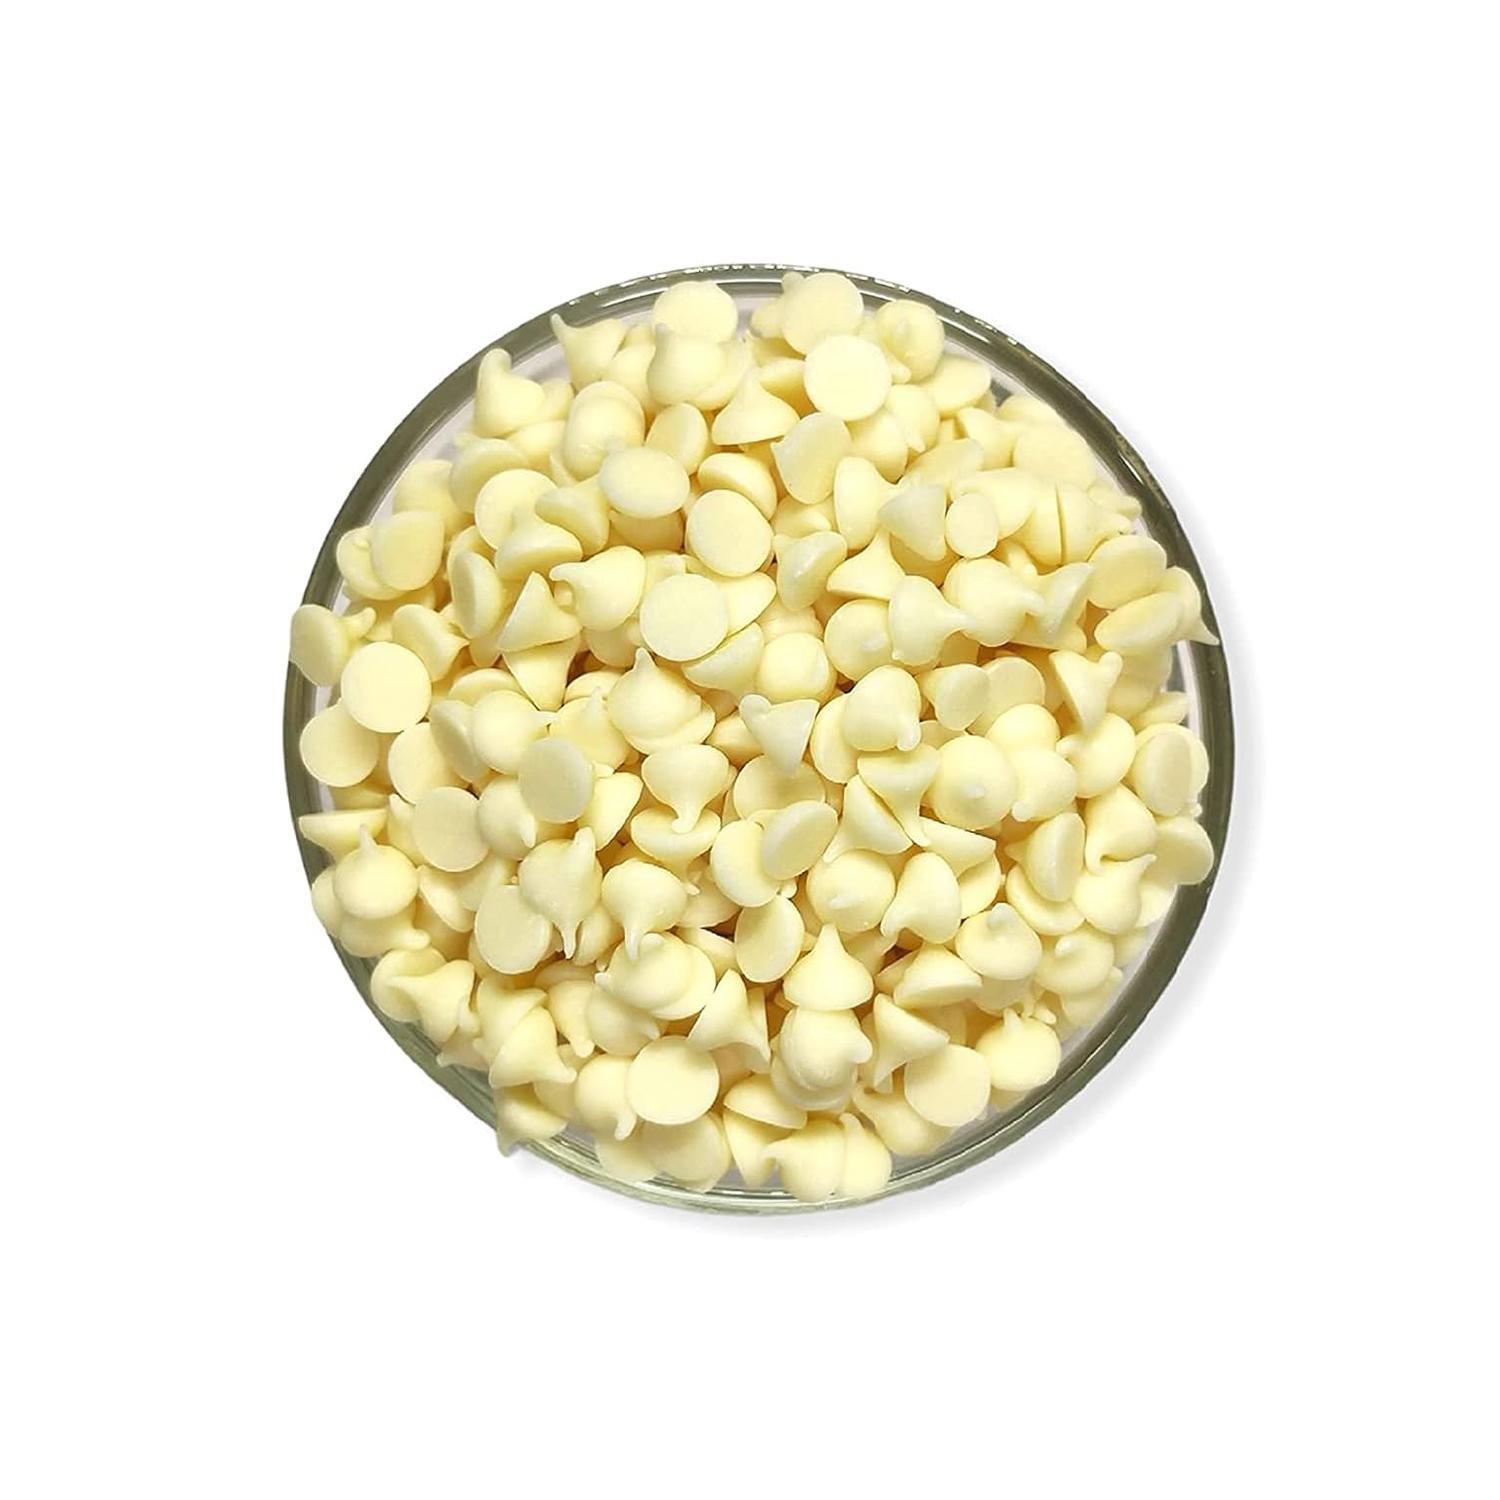 AALST WHITE CHOCOLATE CHIPS 200G